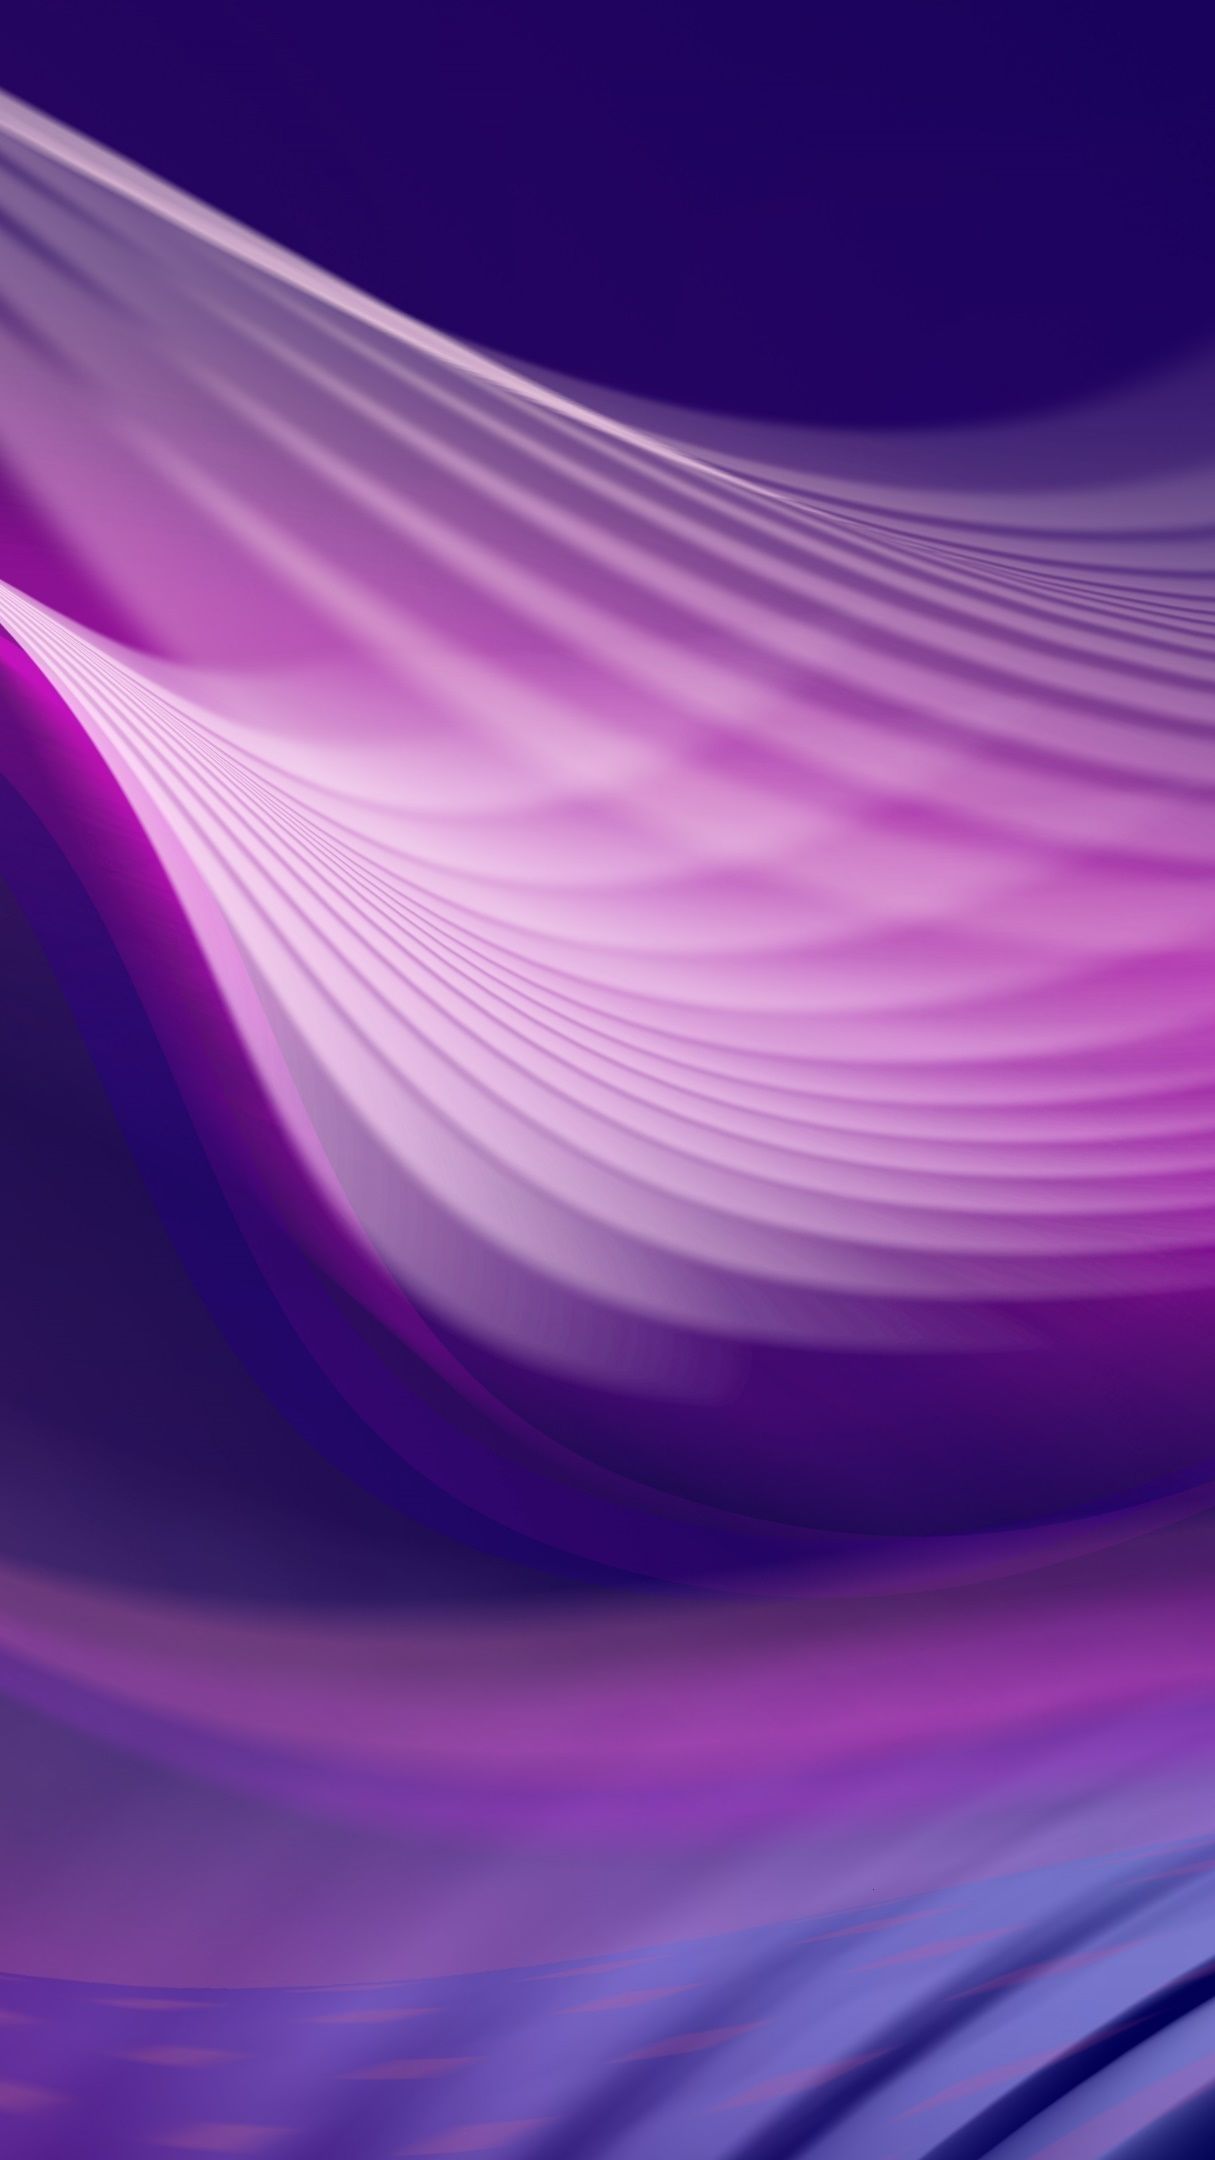 A purple and blue abstract image - Violet